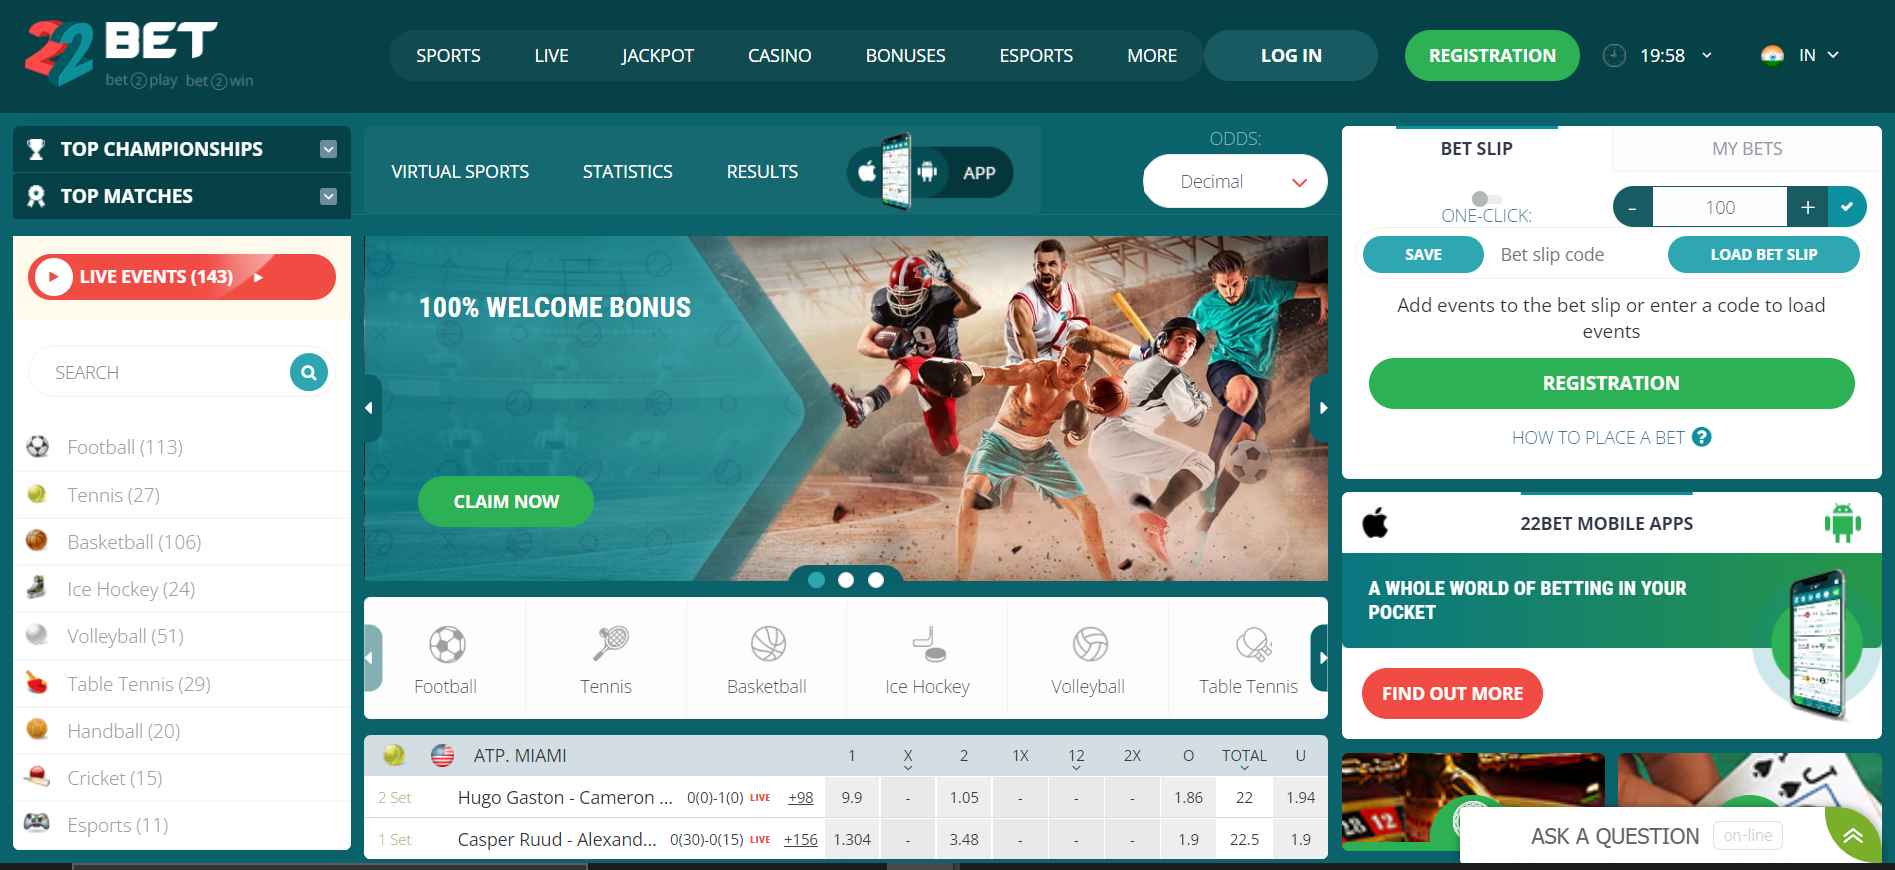 22bet offers lucrative bonuses and betting options to its players starting from its homepage.